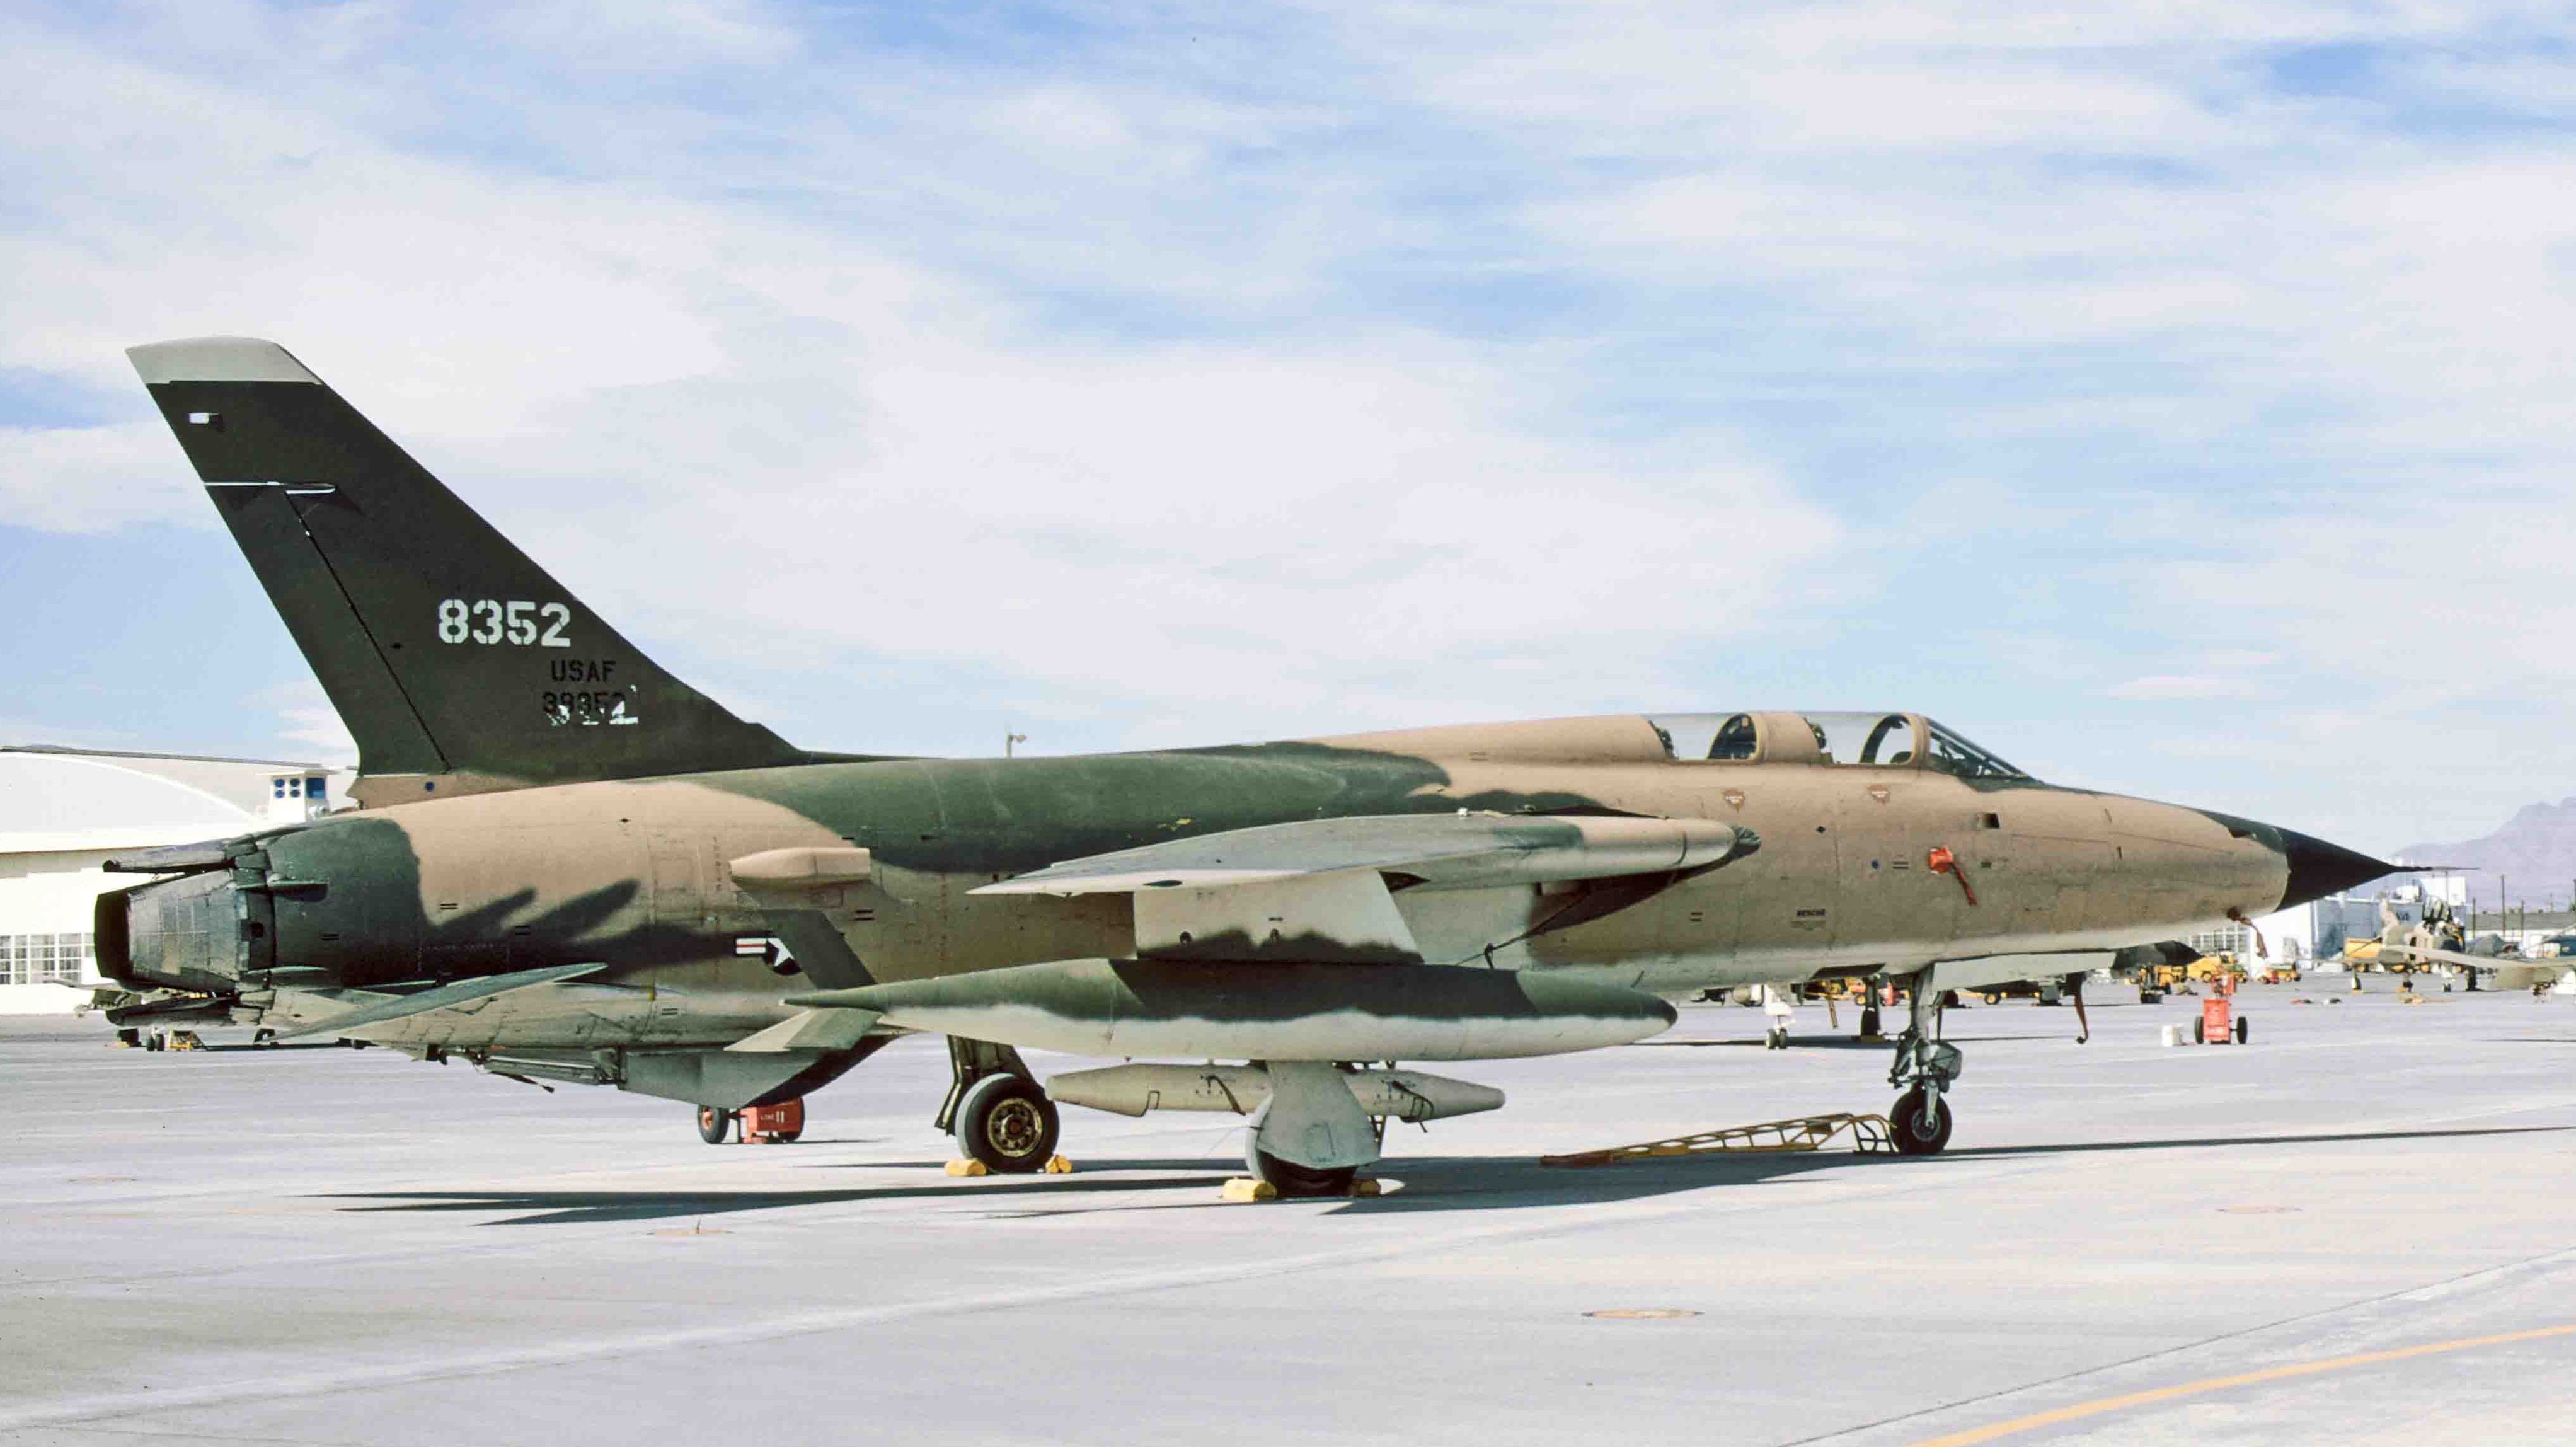 Captains Merlyn Dethlefsen and Kevin Gilroy flew this Republic F-105F-1-RE Thunderchief on 10 March 1967. It is seen here at Nellis AFB, Nevada, 29 August 1966. 63-8352 was destroyed by fire after running off the runway at Udorn RTAFB, 8 December 1969. The pilot, Major Carl R. Rice, was killed.